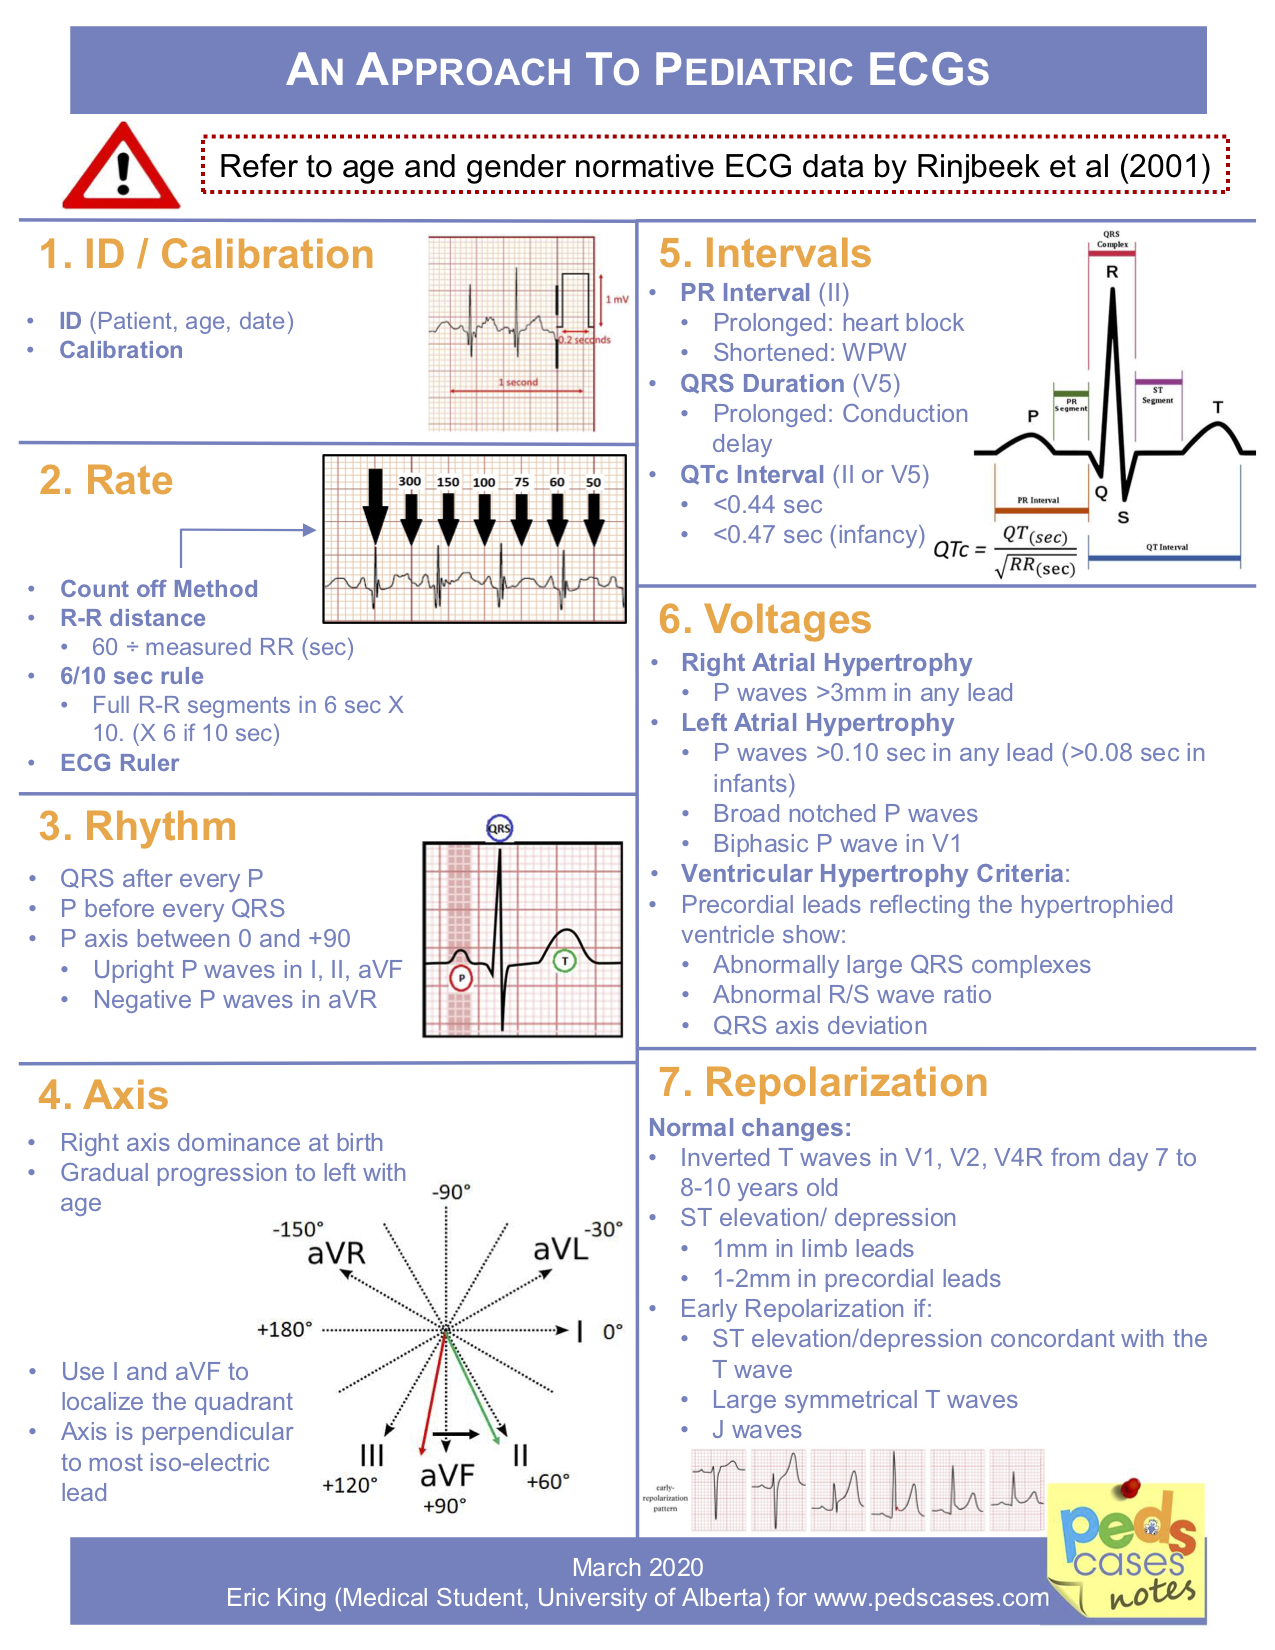 Approach to Pediatric ECG | PedsCases